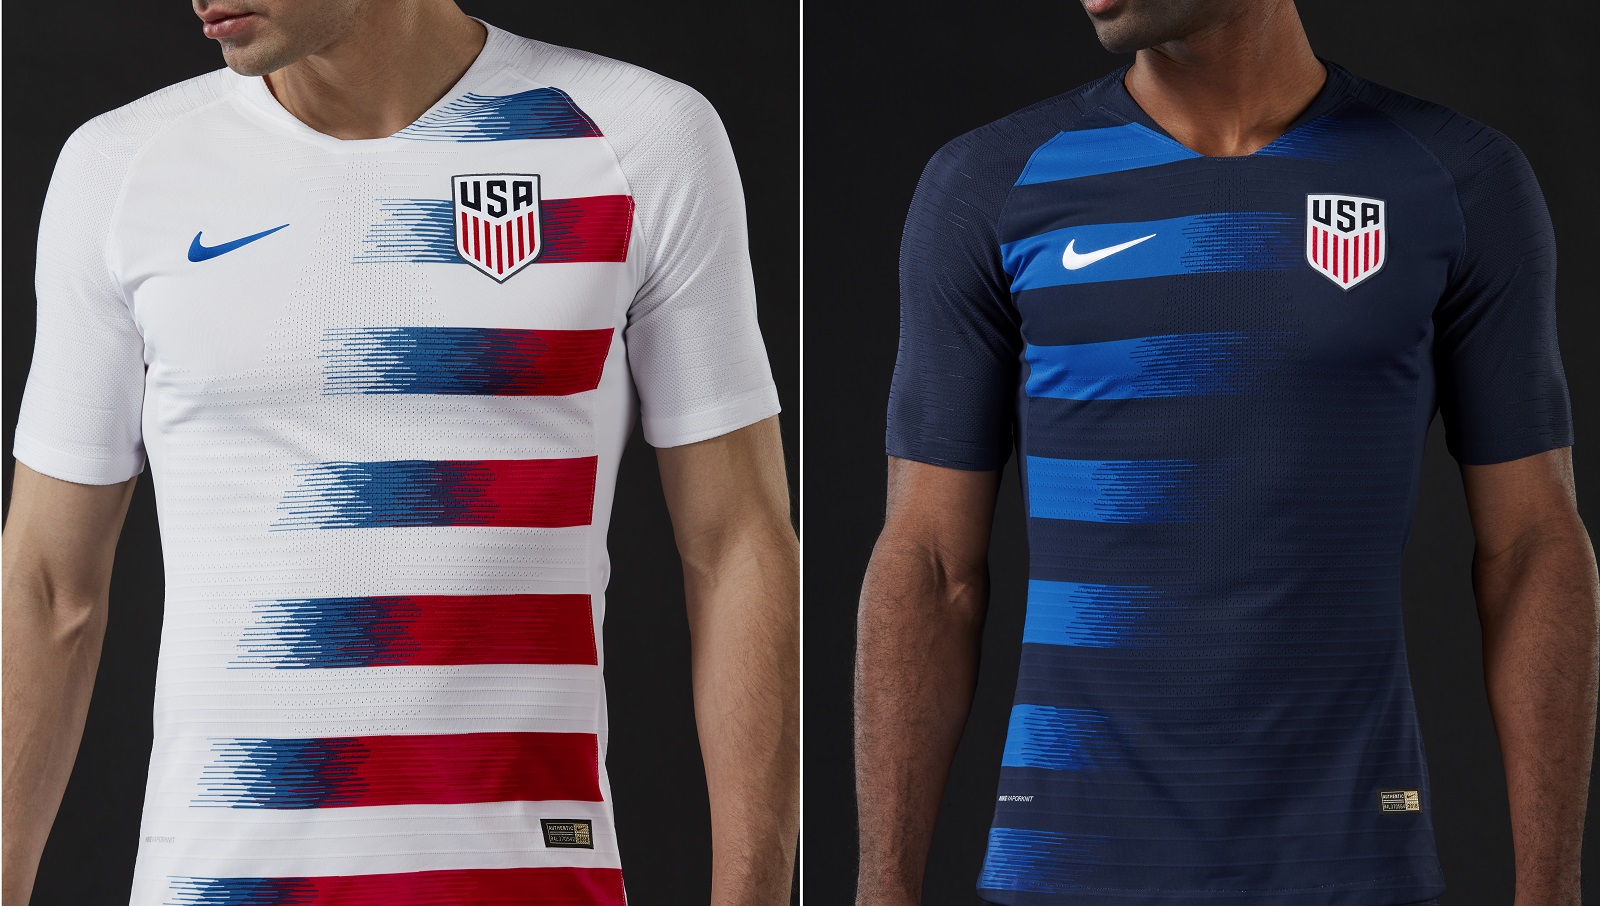 Nike Release USA Home + Away Kits For 2018 - Soccer Cleats 101